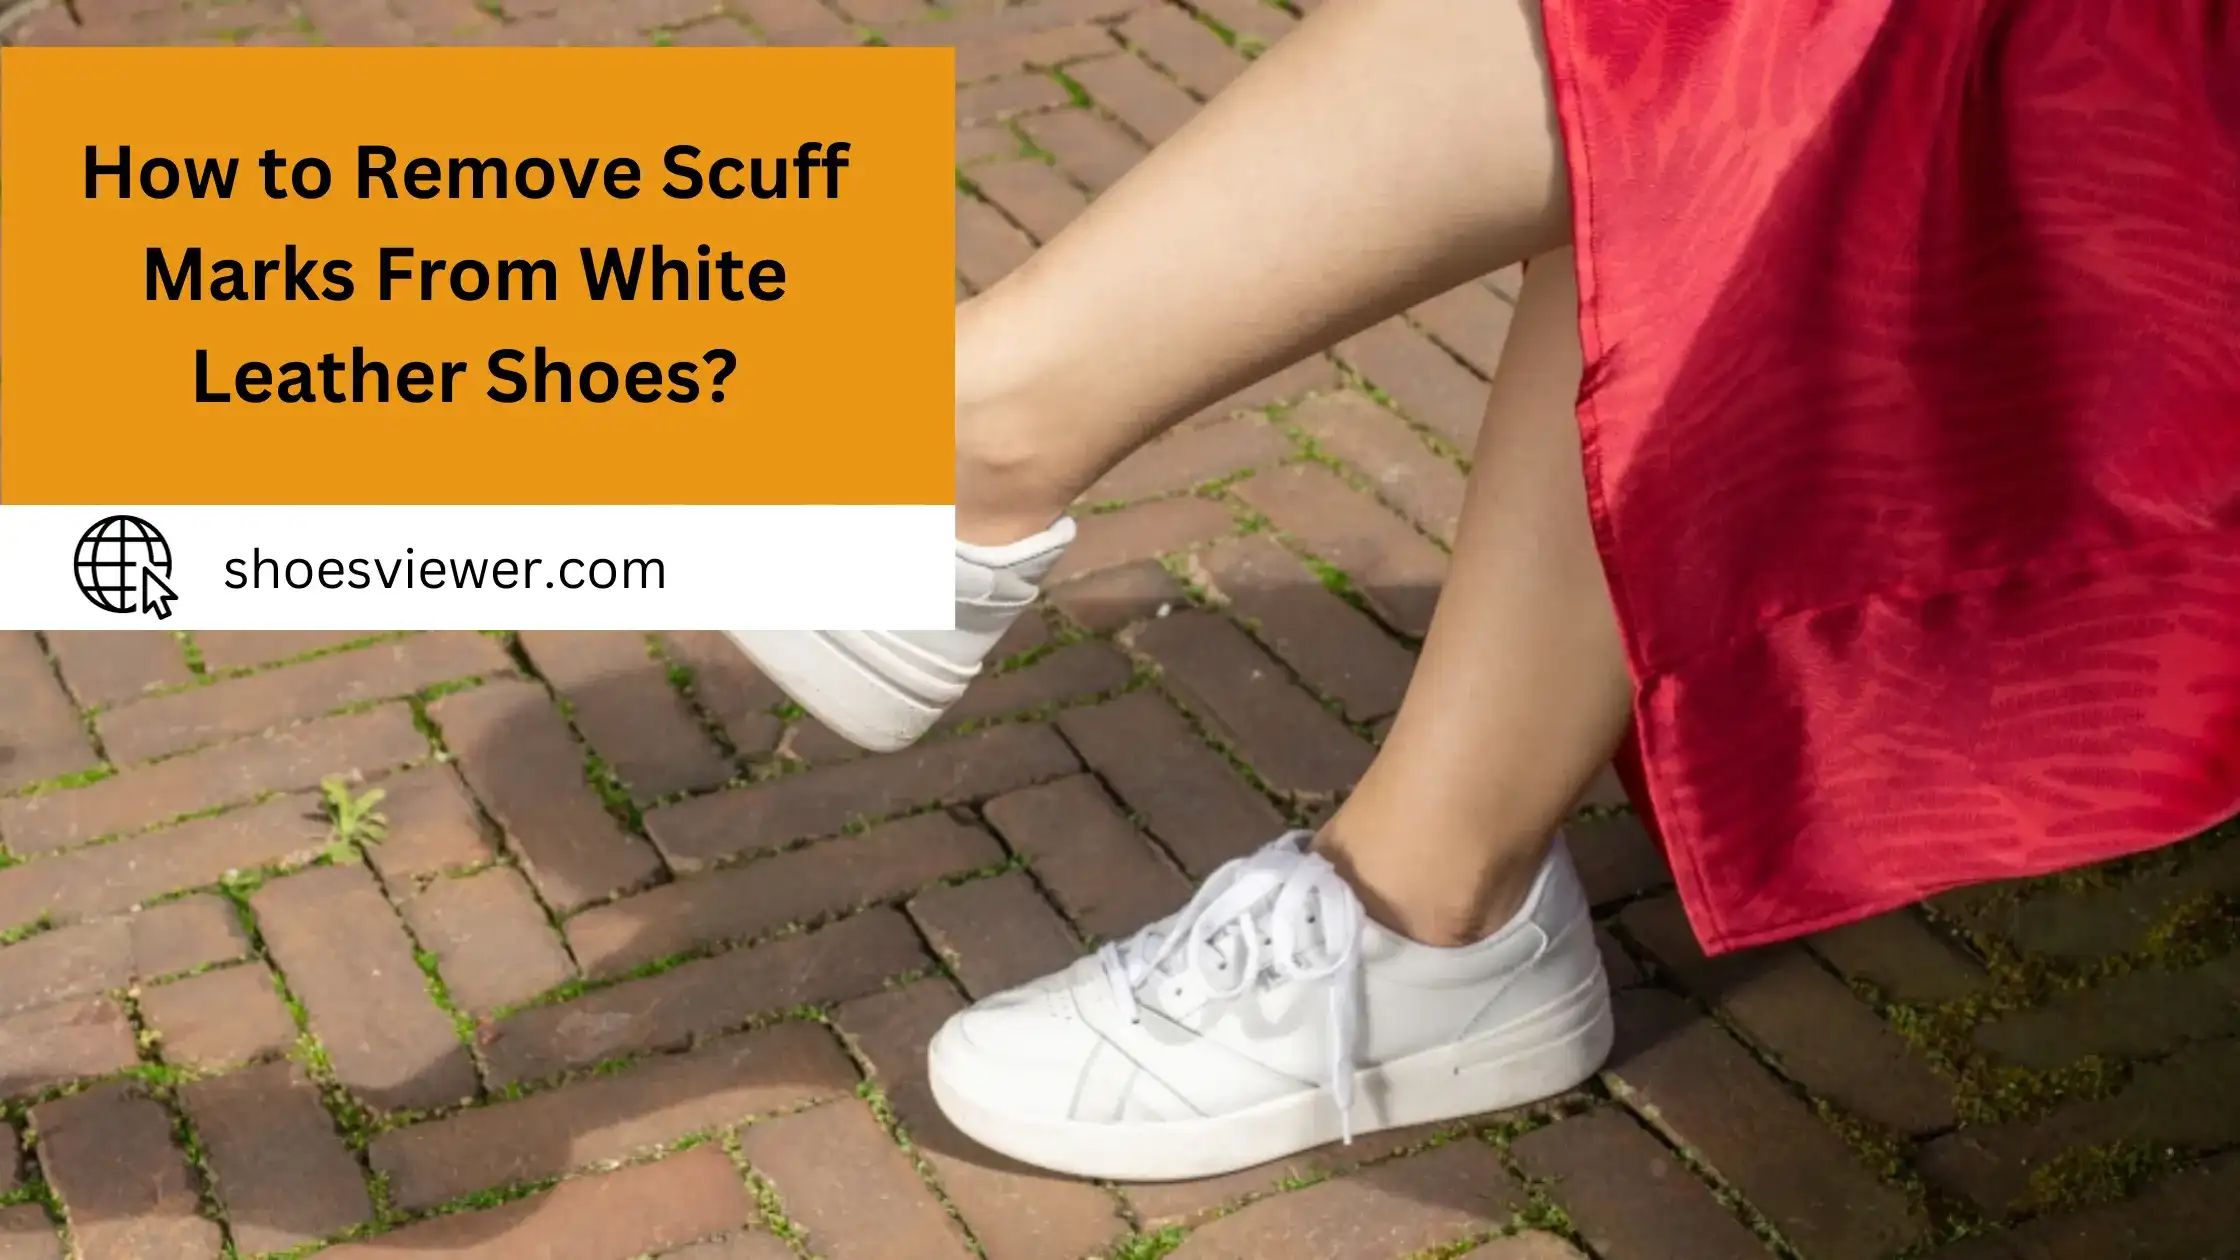 How to Remove Scuff Marks From White Leather Shoes?